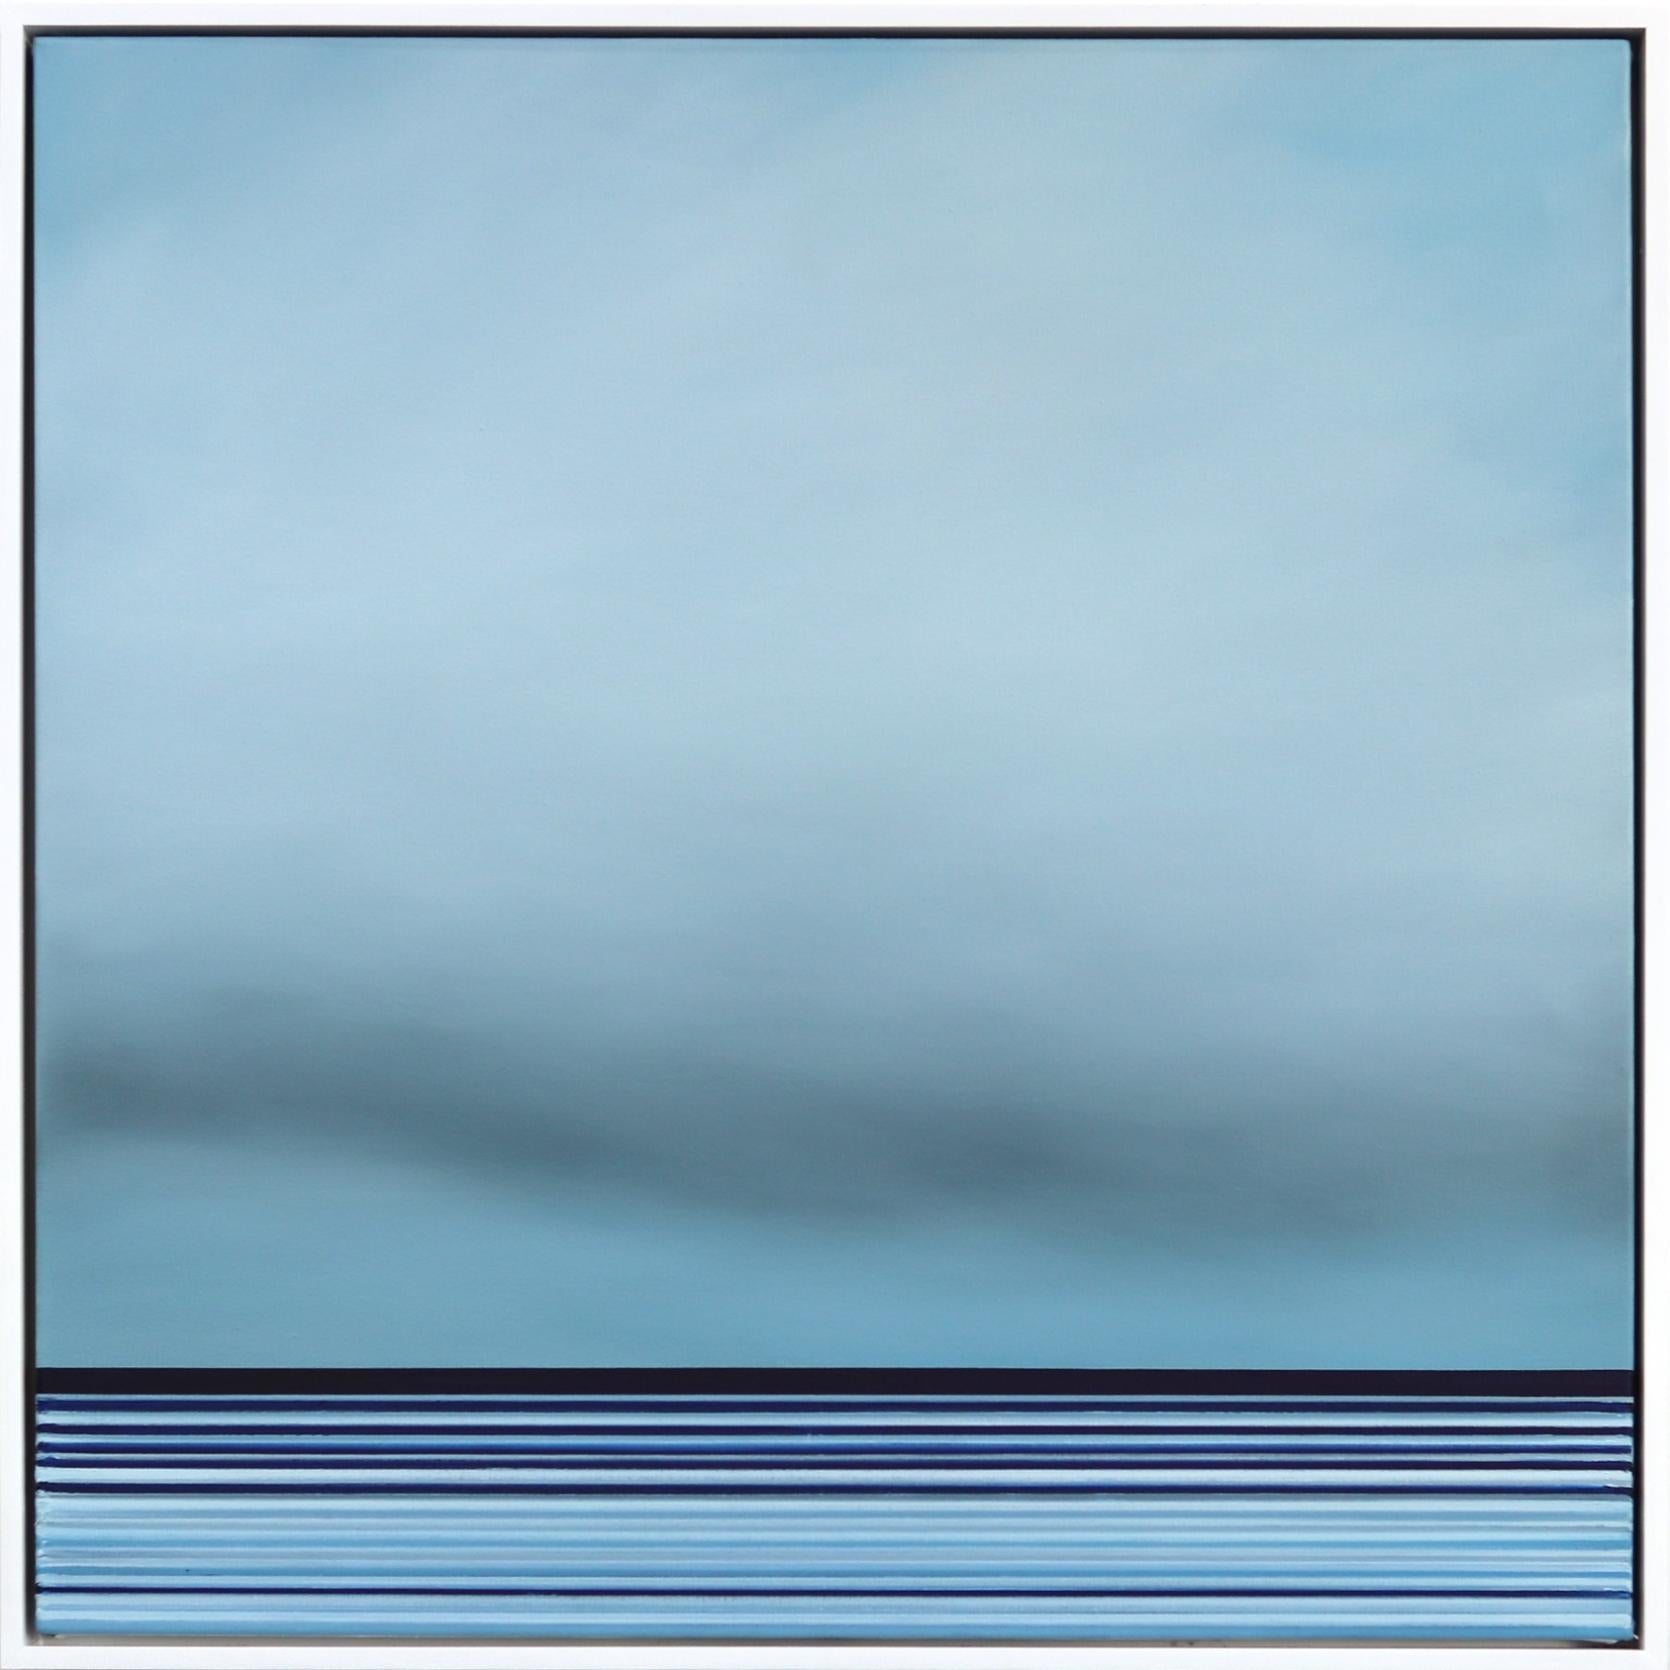 Jeremy  Prim Abstract Painting - "Untitled No. 452" - Original Framed Oil Abstract Seascape by Jeremy Prim